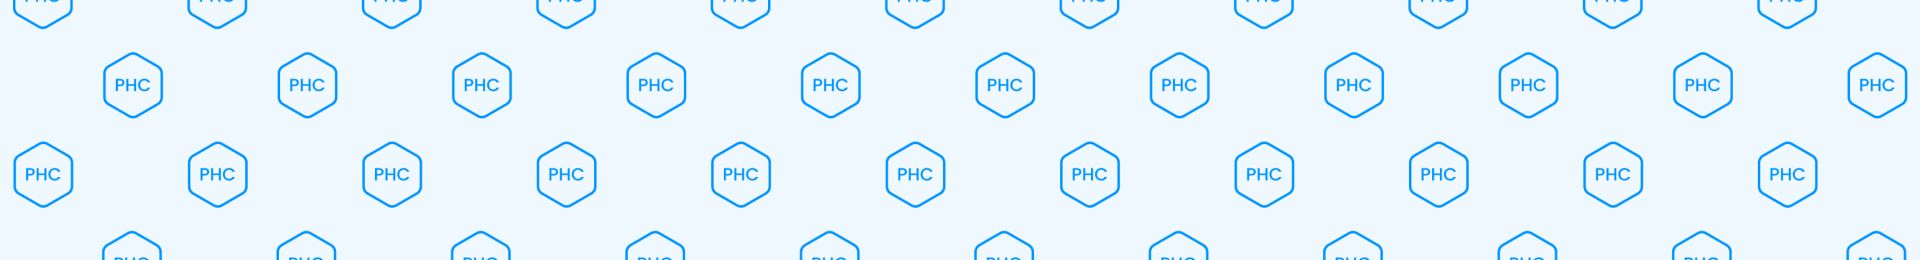 PHC Products